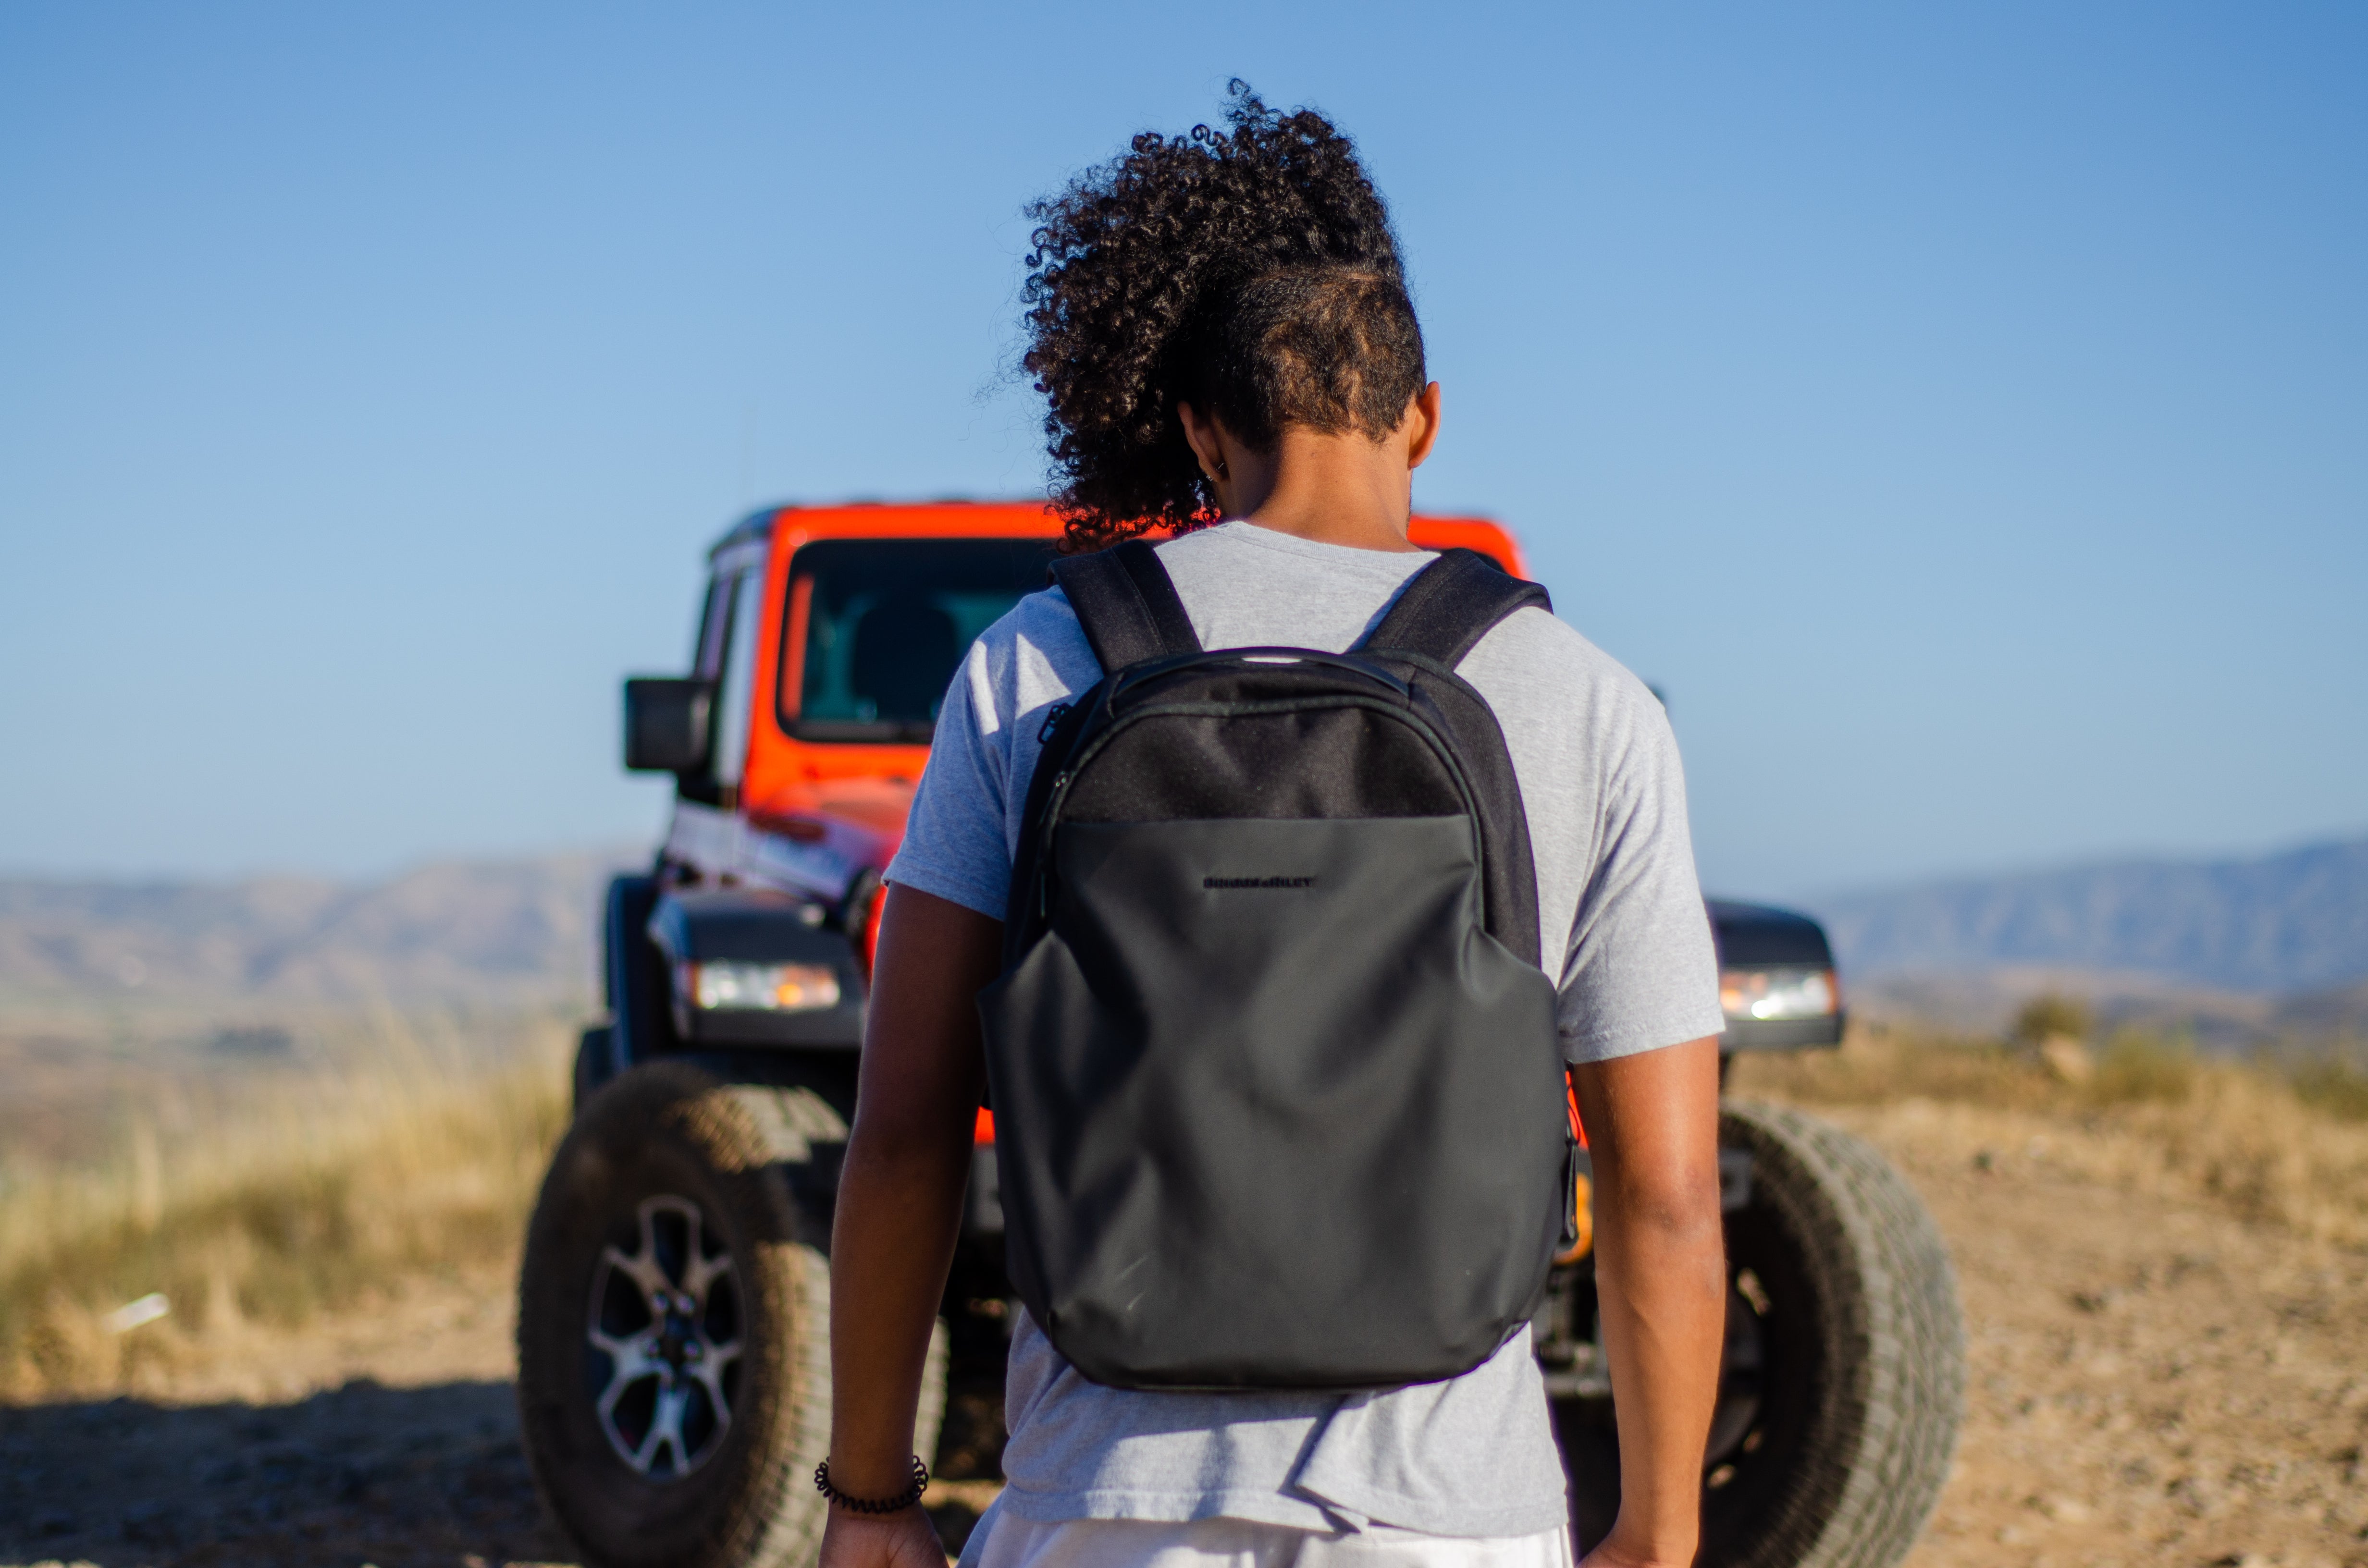 How to Choose a Travel Backpack